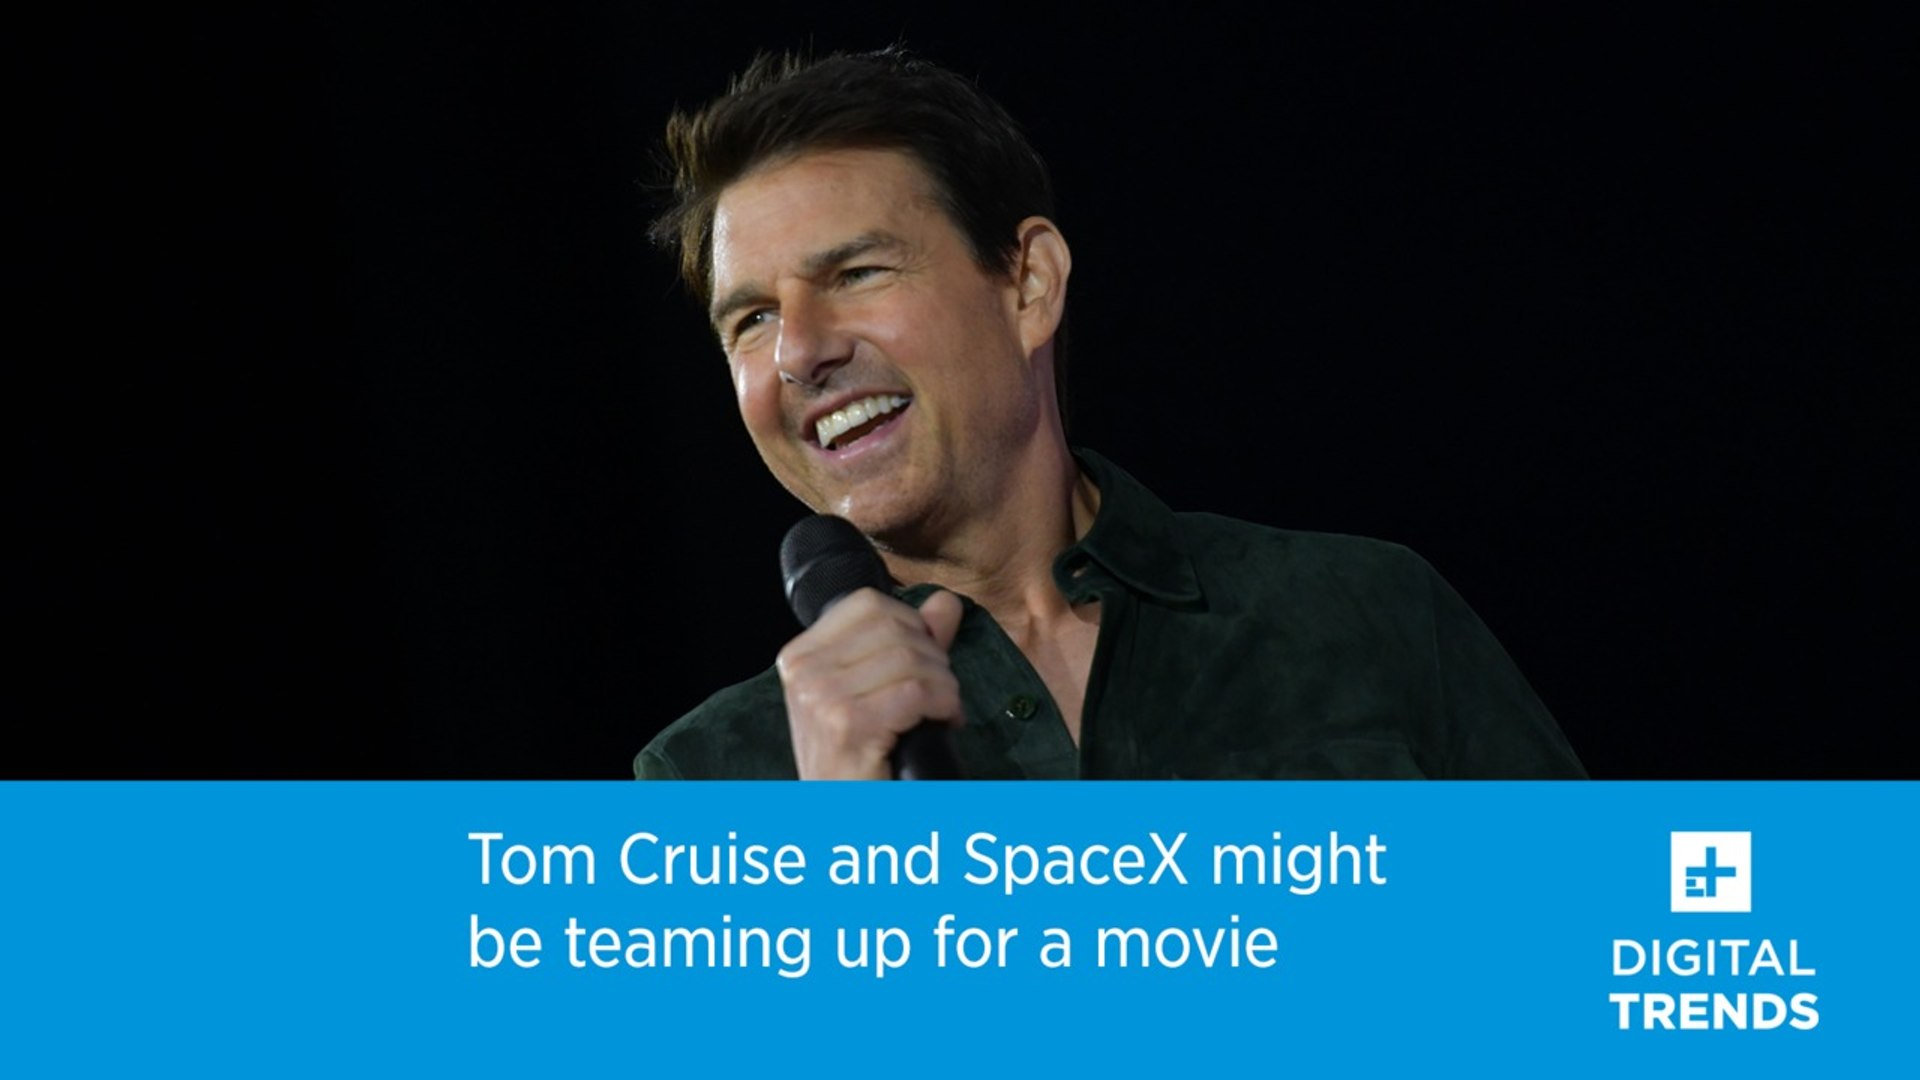 Tom Cruise and SpaceX are Teaming Up!